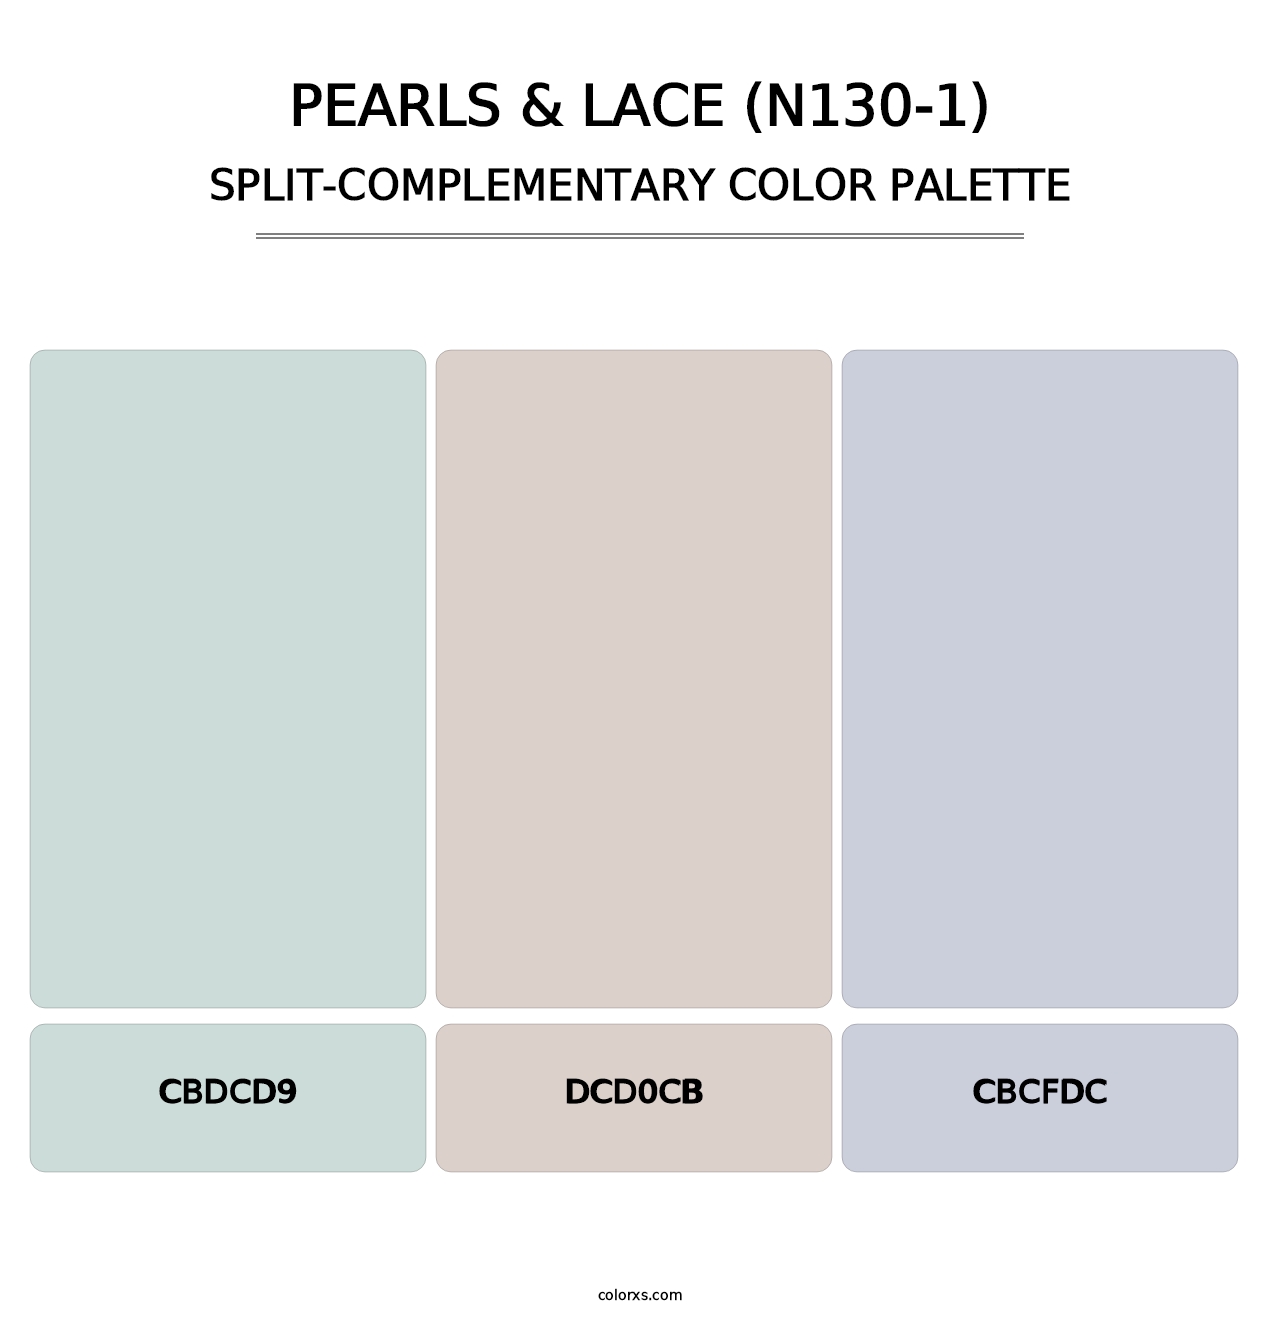 Pearls & Lace (N130-1) - Split-Complementary Color Palette